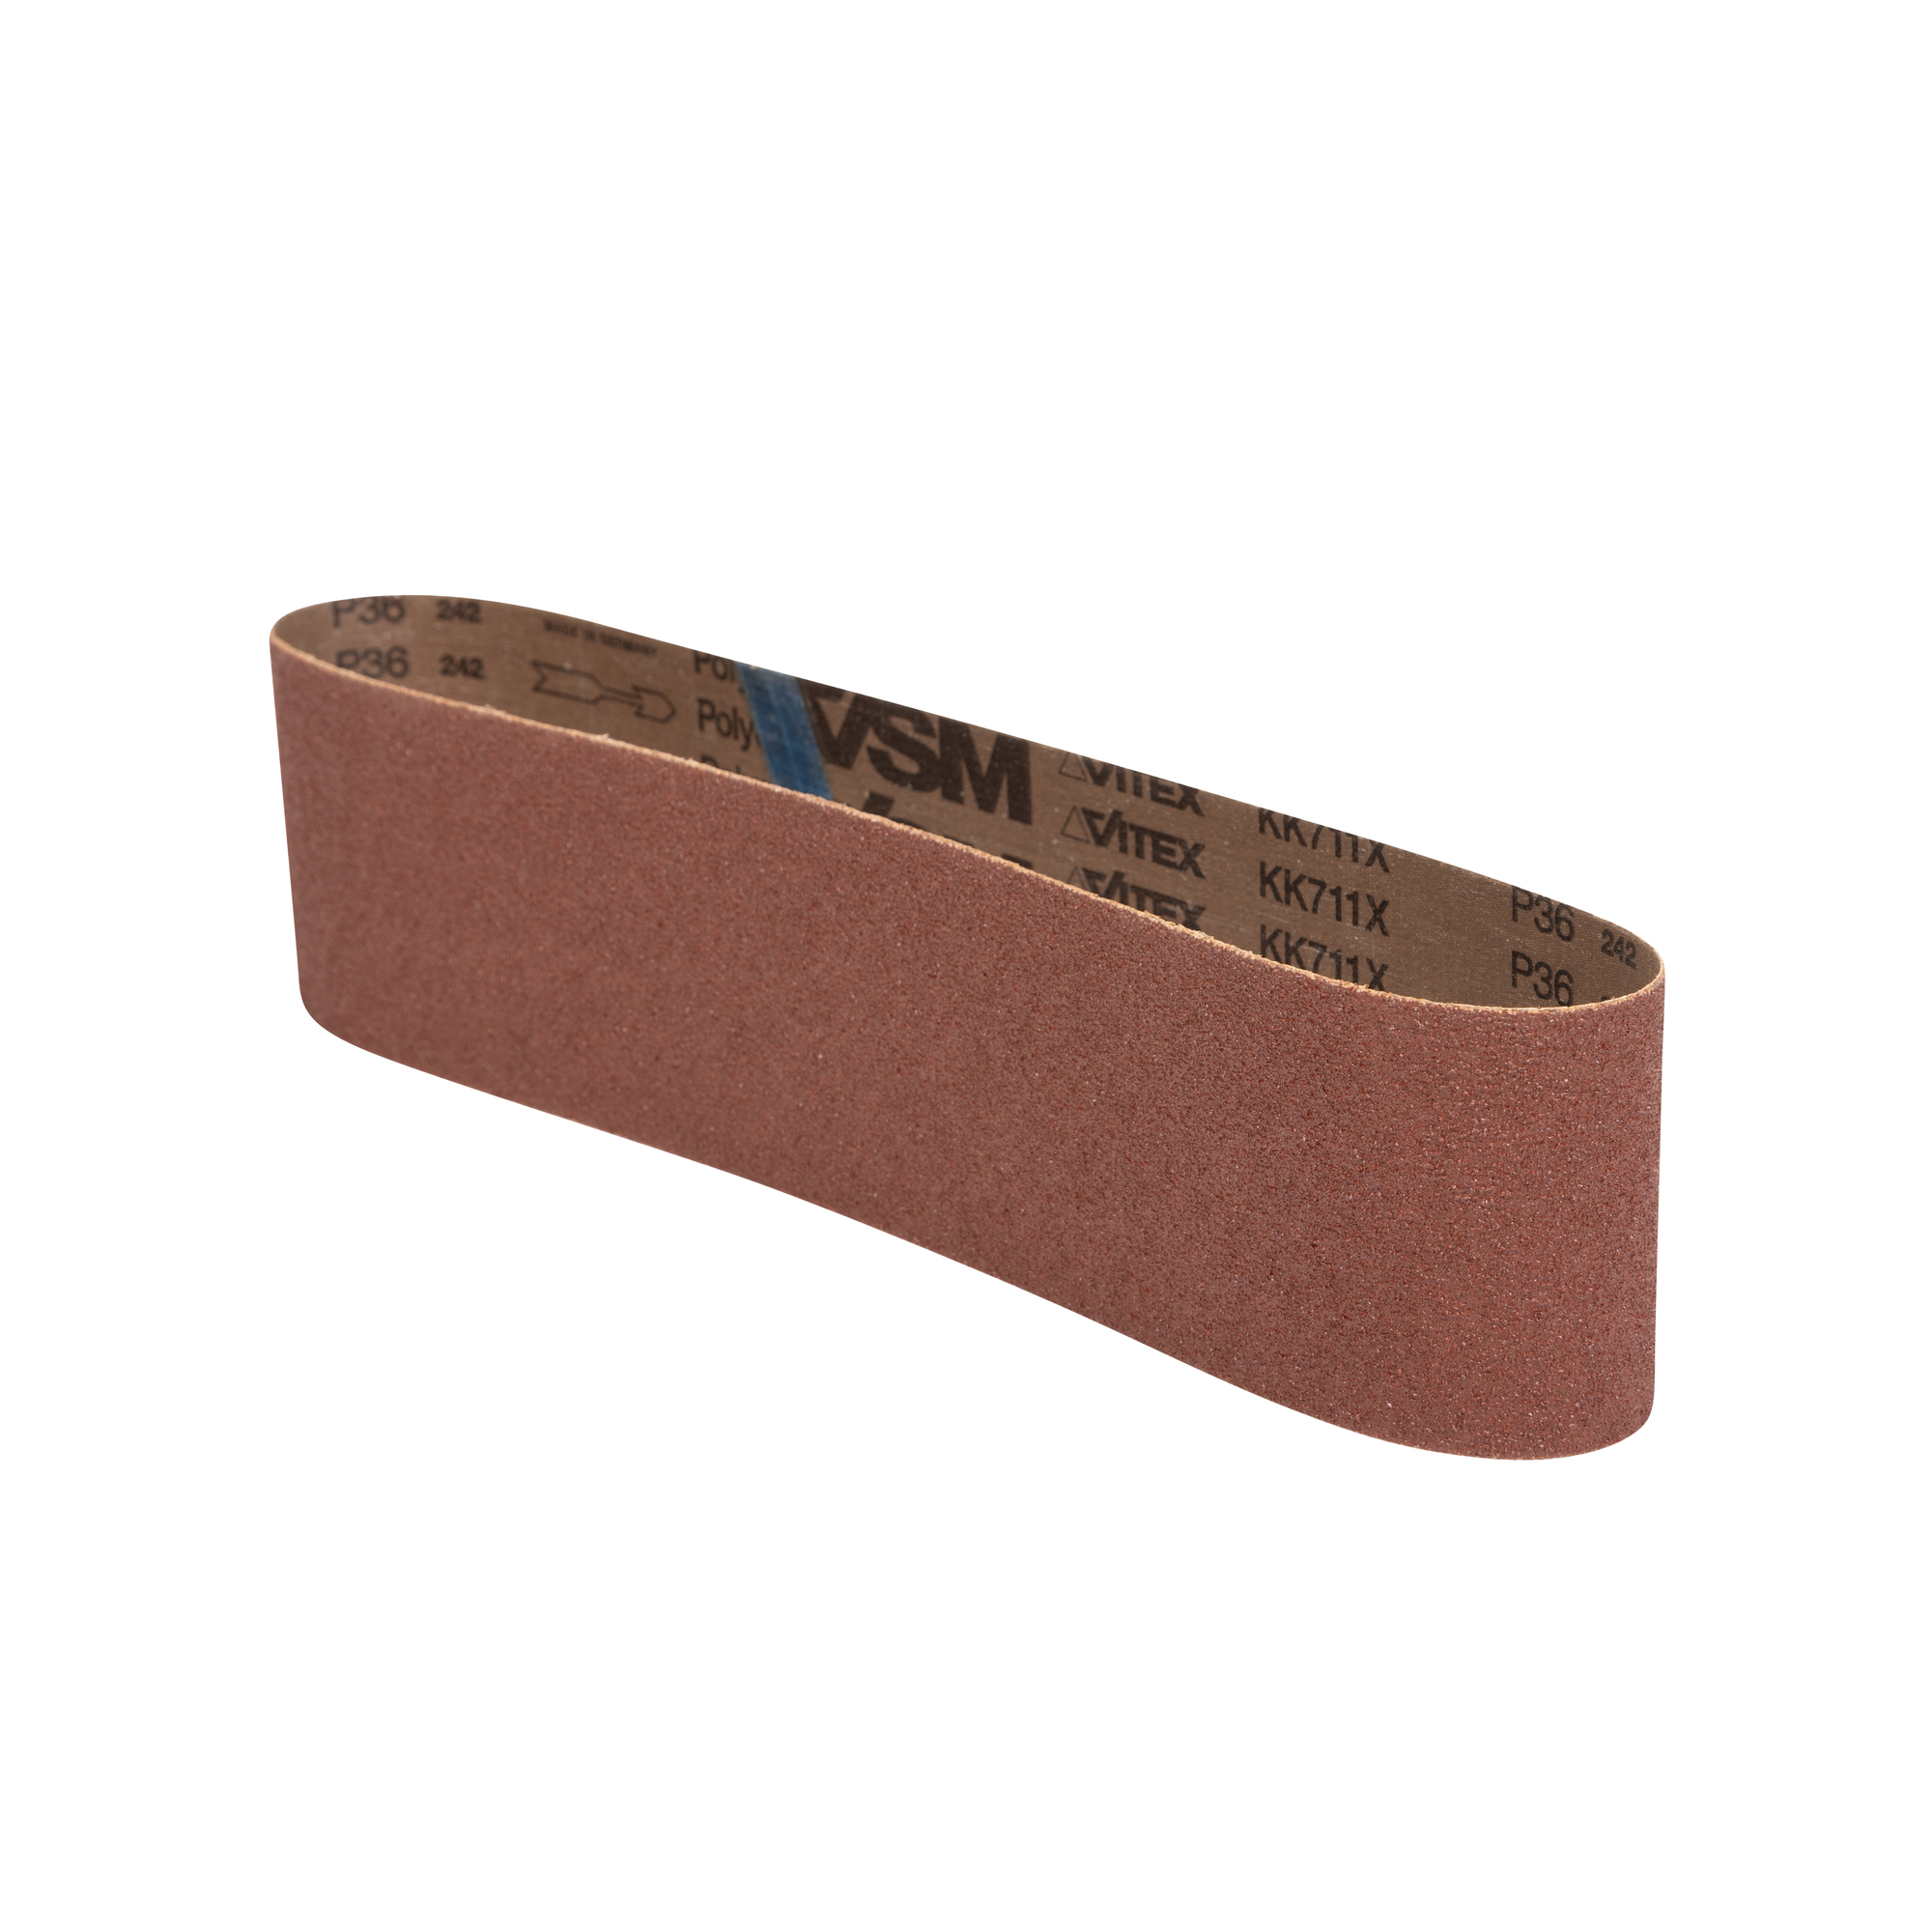 JET, Sand Paper, Pieces (qty.) 3 Grit 80 Length 36 in, Model 577530